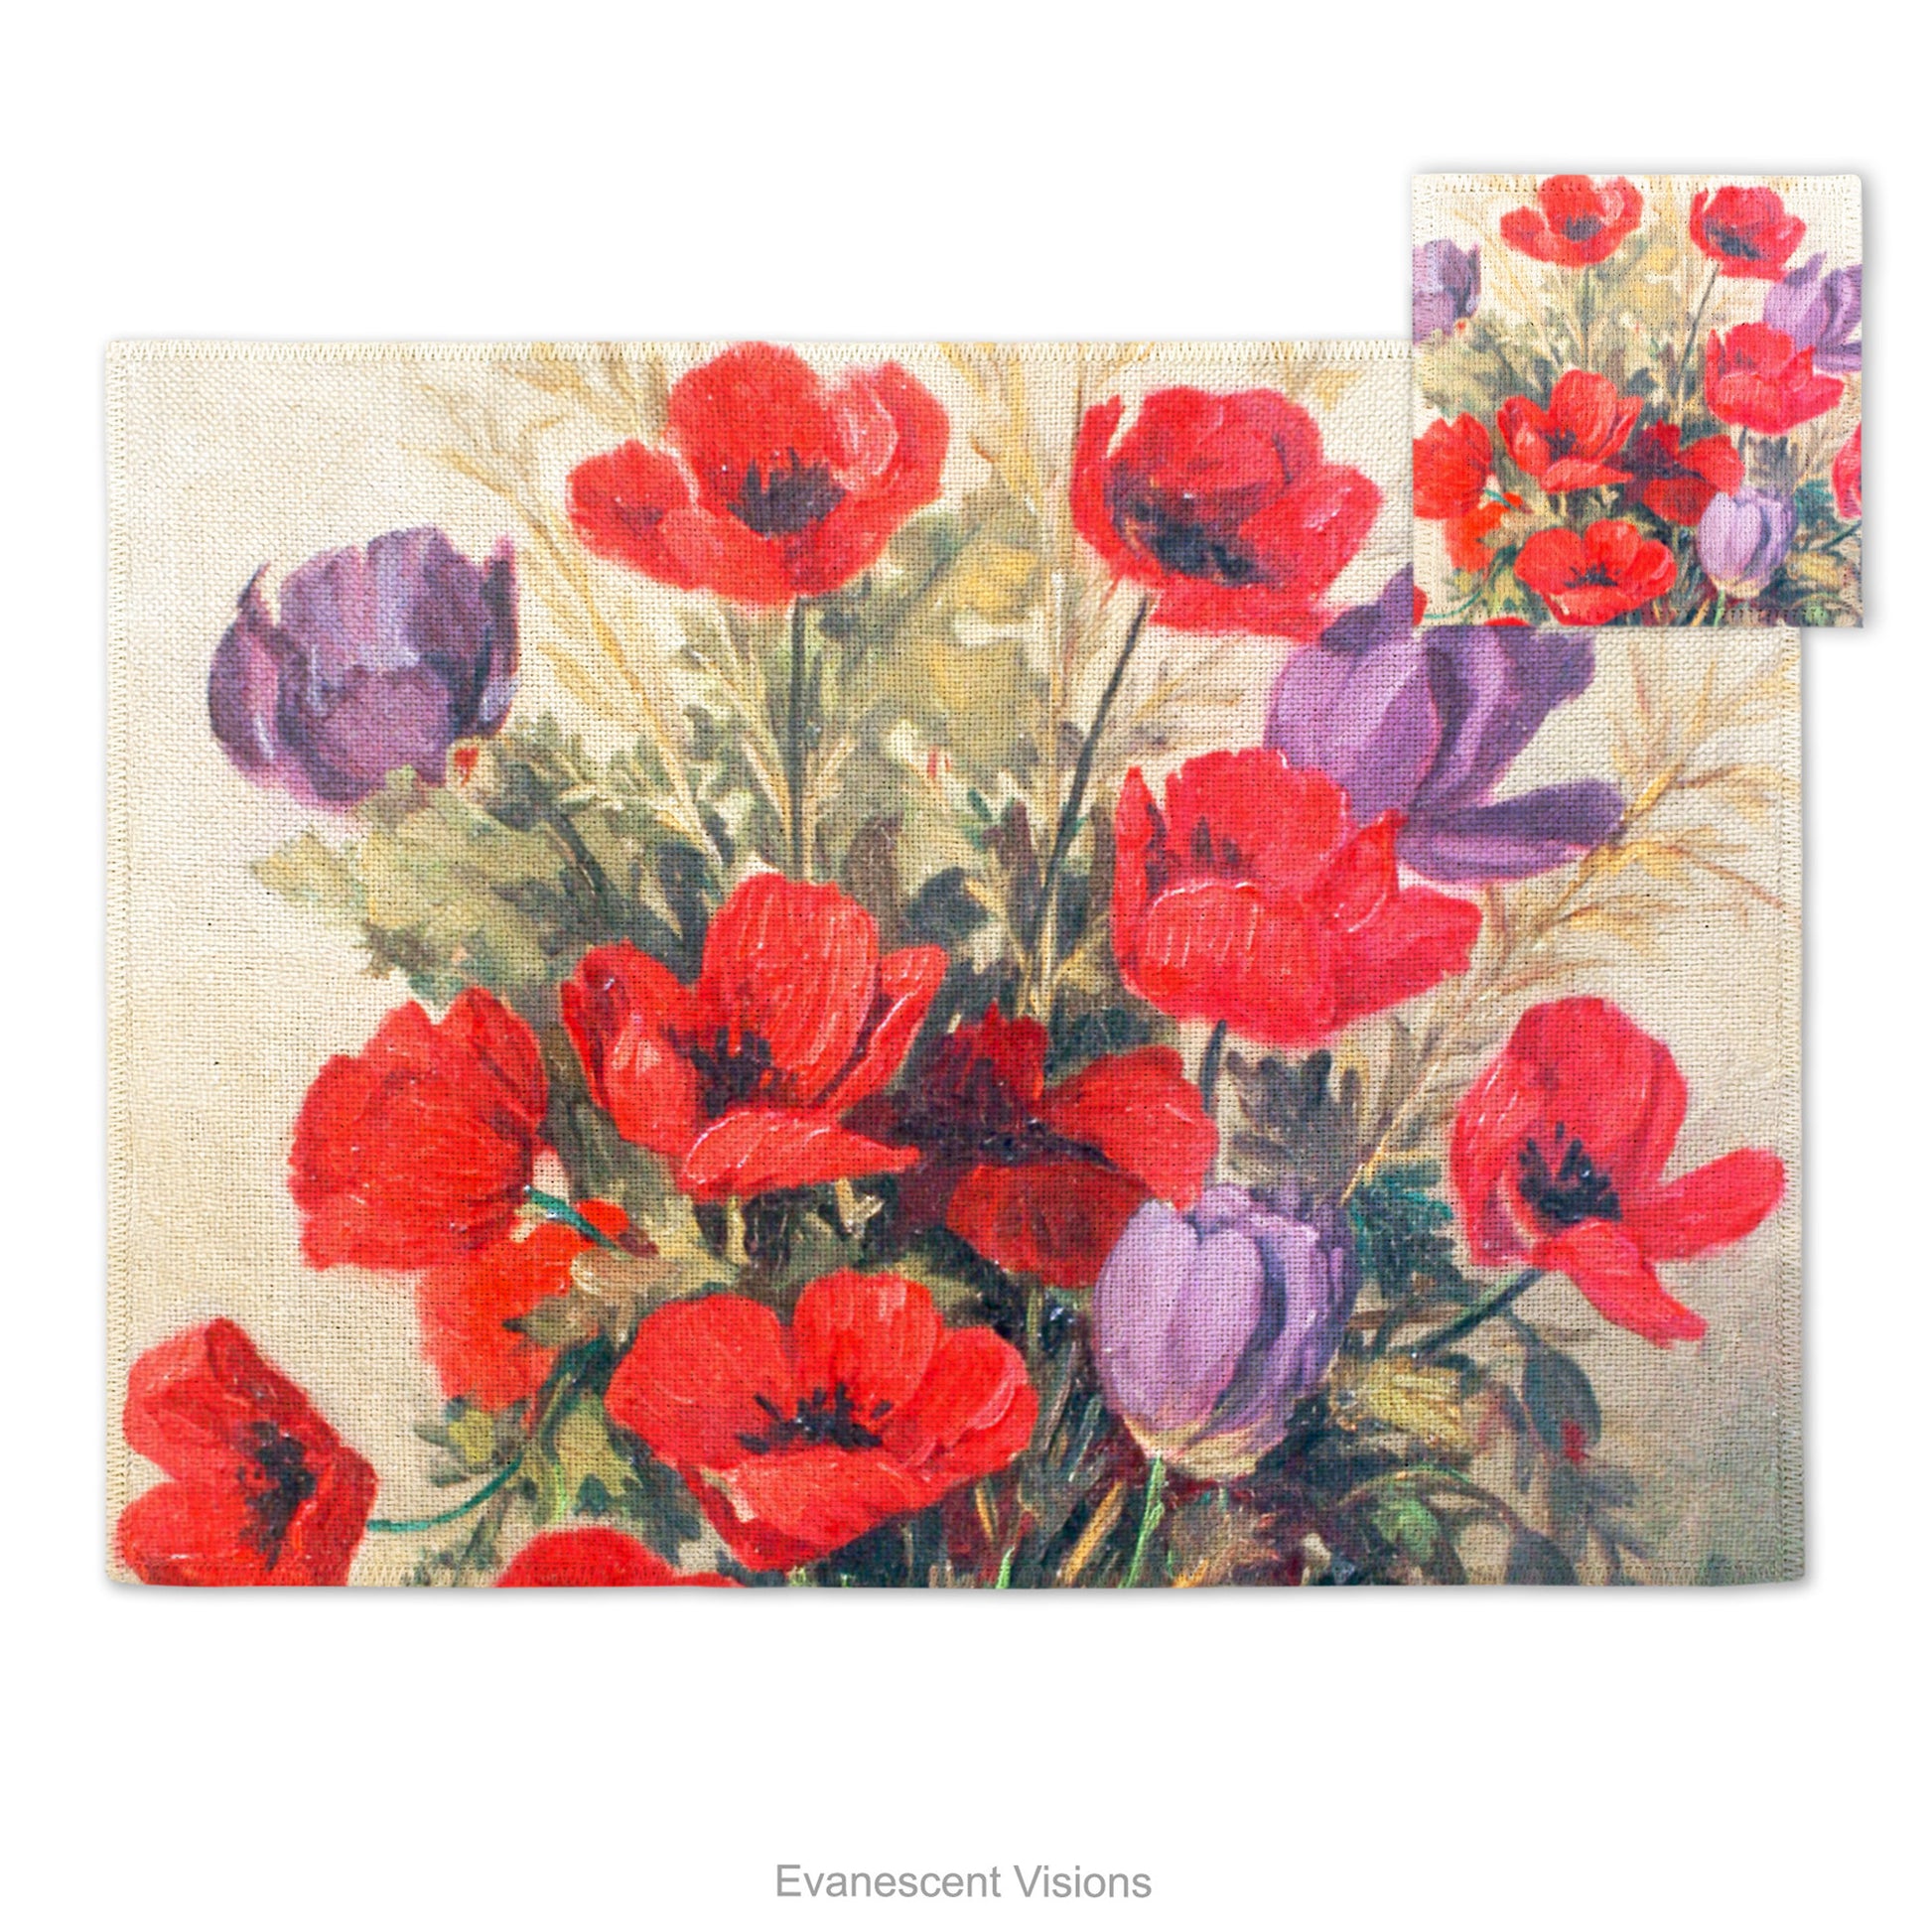 Placemat and coaster with design of red and purple poppies by early 20th century artist G.V. Geffen